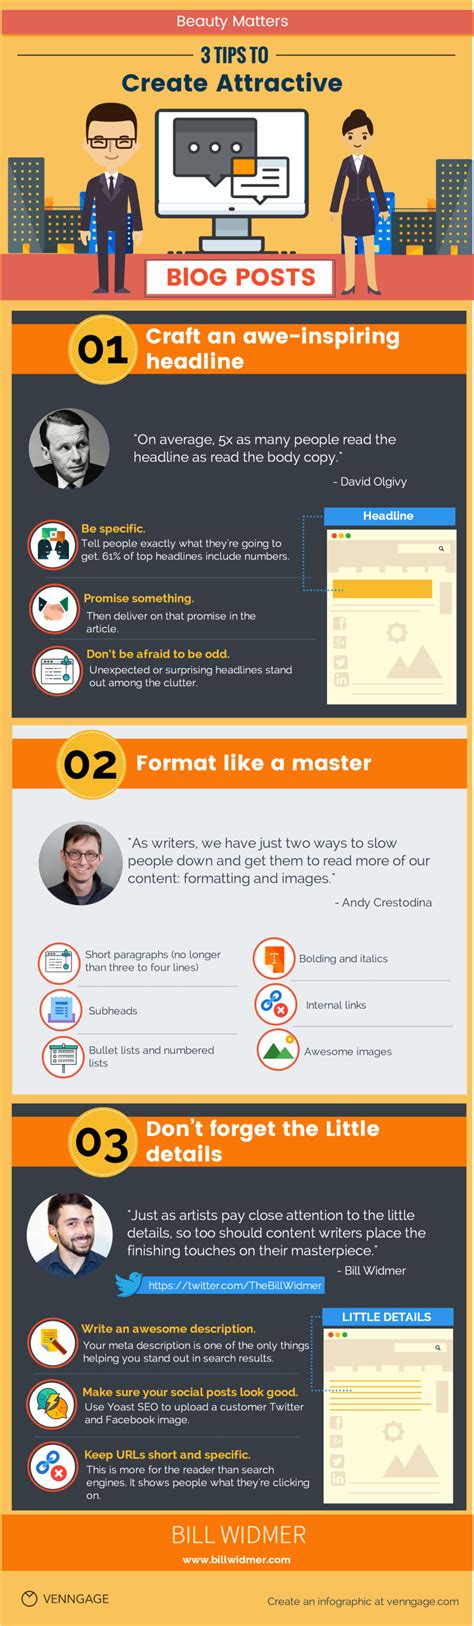 3 Tips To Create Attractive Blog Posts Infographic Bill Widmer